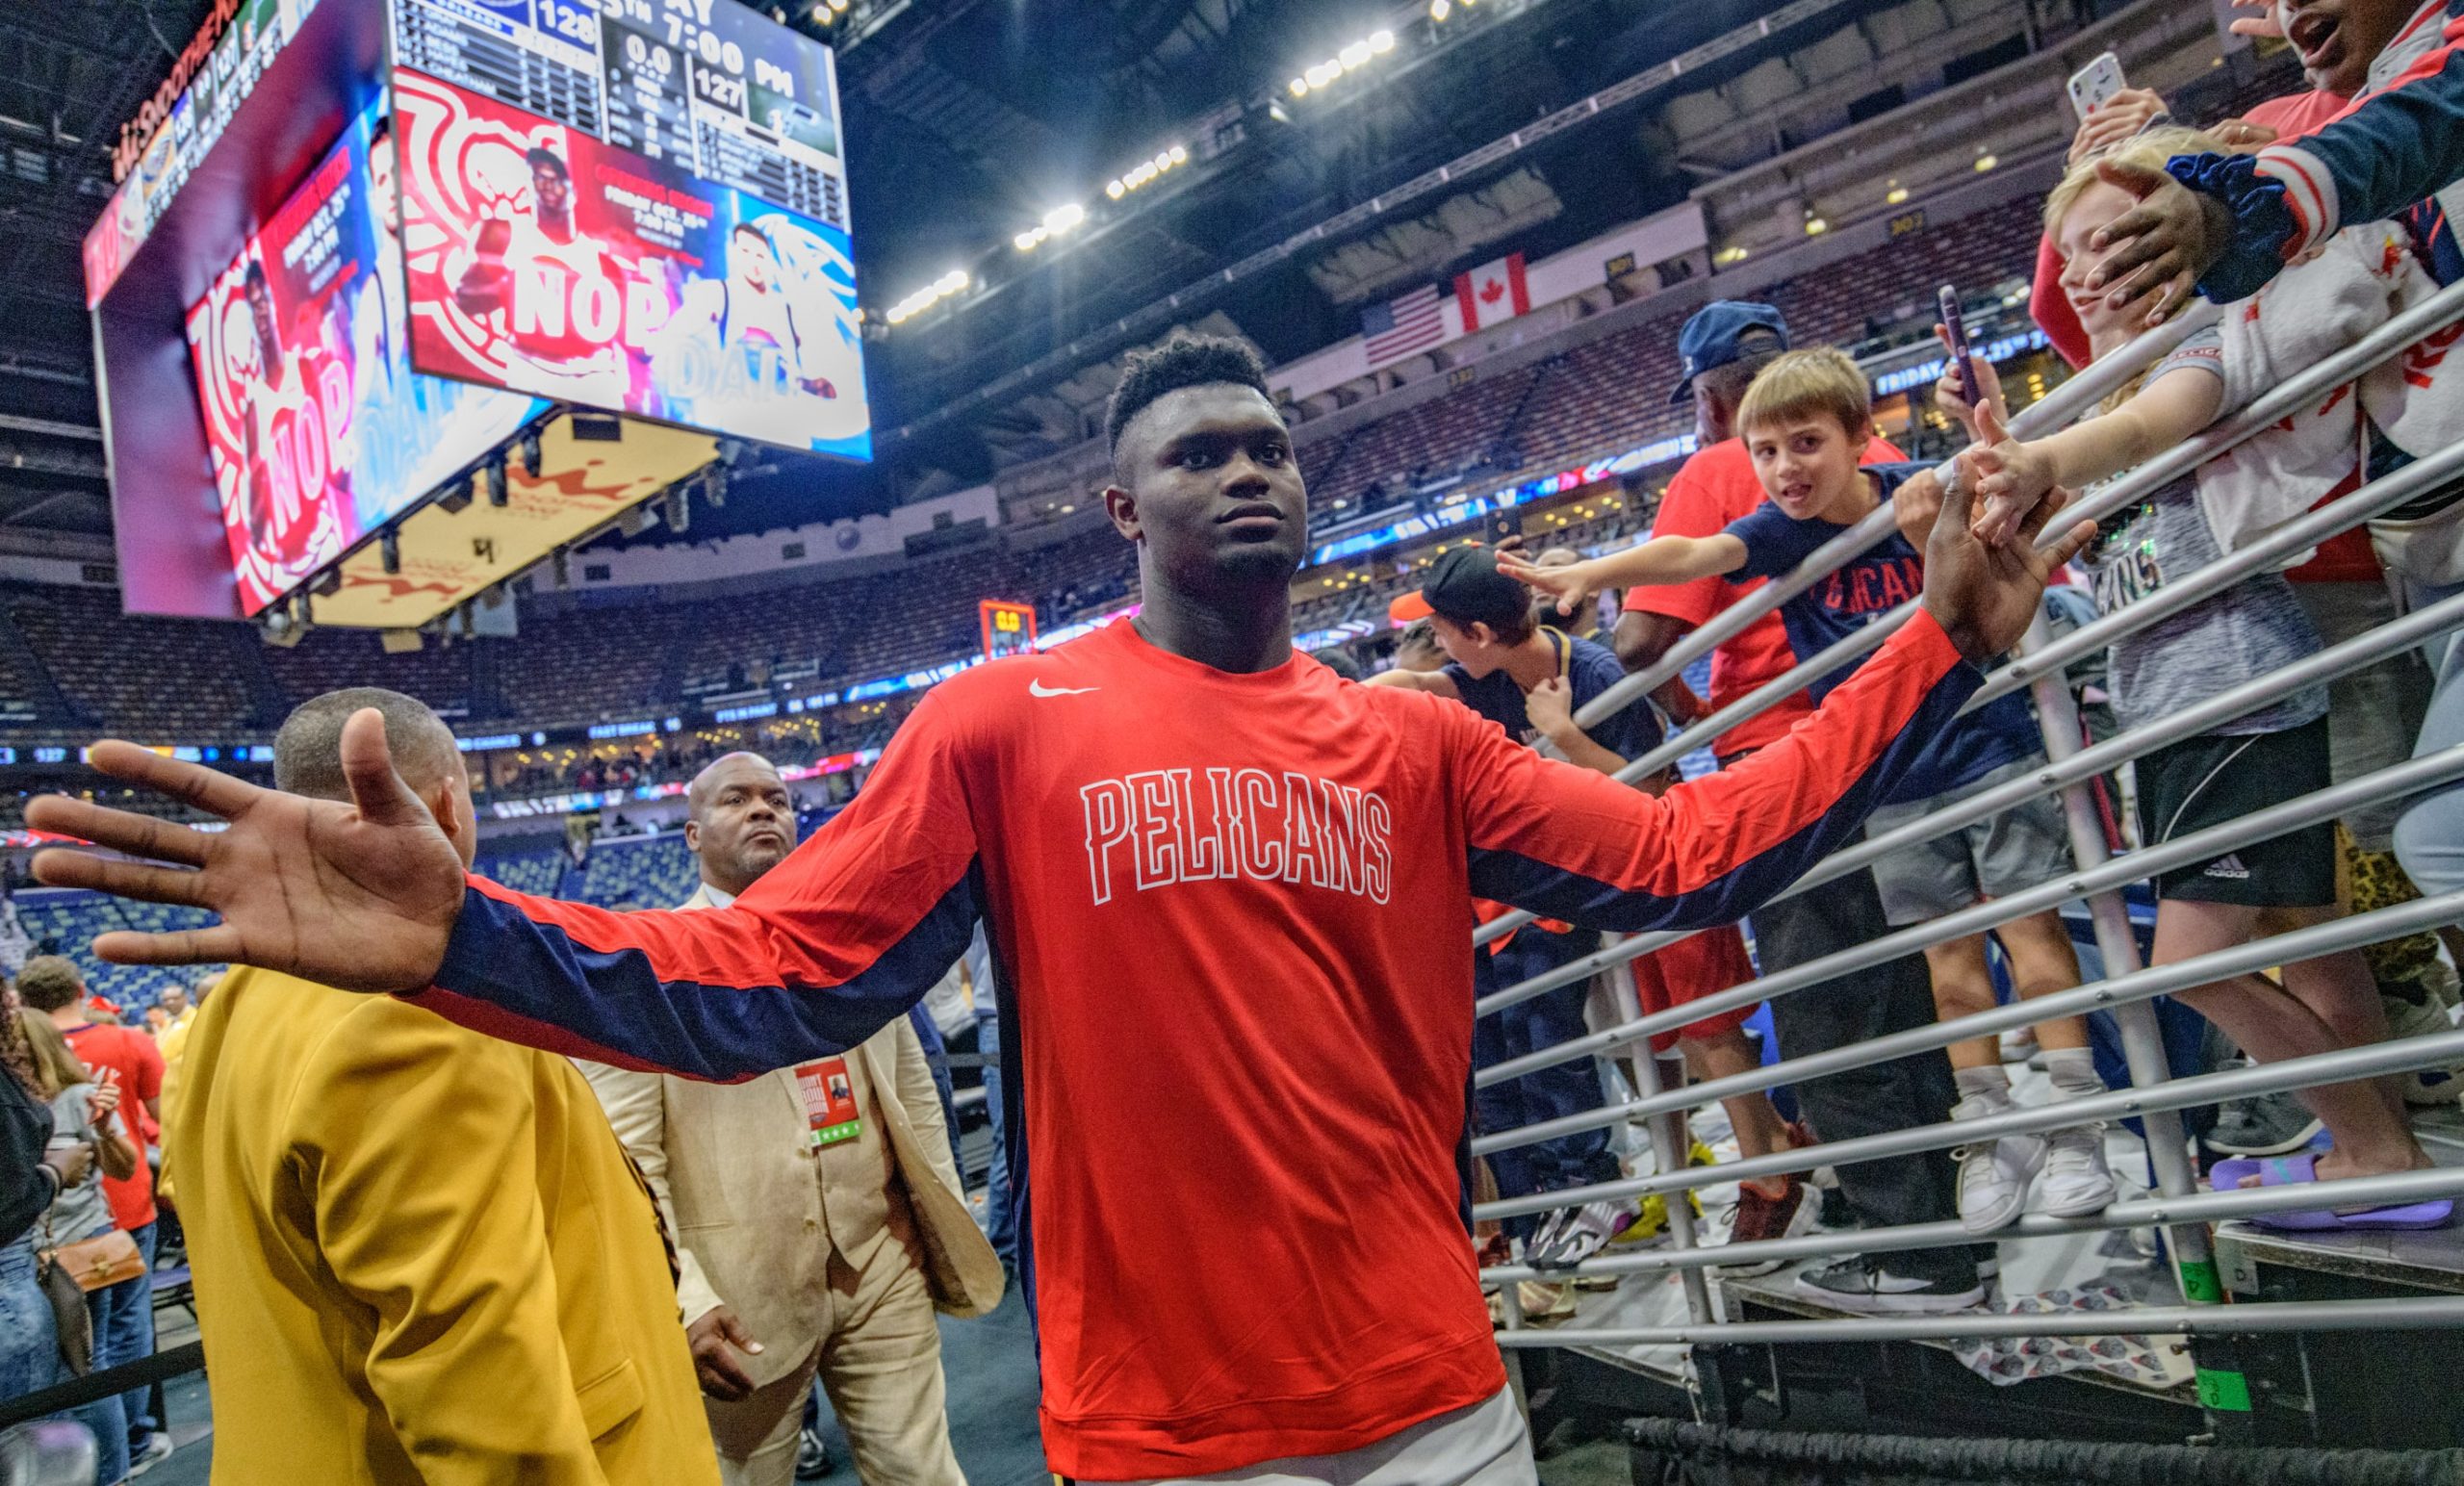 New Orleans Pelicans forward Zion Williamson (1) high-fives fans as he leaves as the top scorer with 26 points in his teams 128-127 victory over the Utah Jazz in New Orleans, Friday, Oct. 11, 2019. Williamson, the number one pick in the NBA draft, made his home debut during the preseason game at the Smoothie King Center. Photo by Matthew Hinton